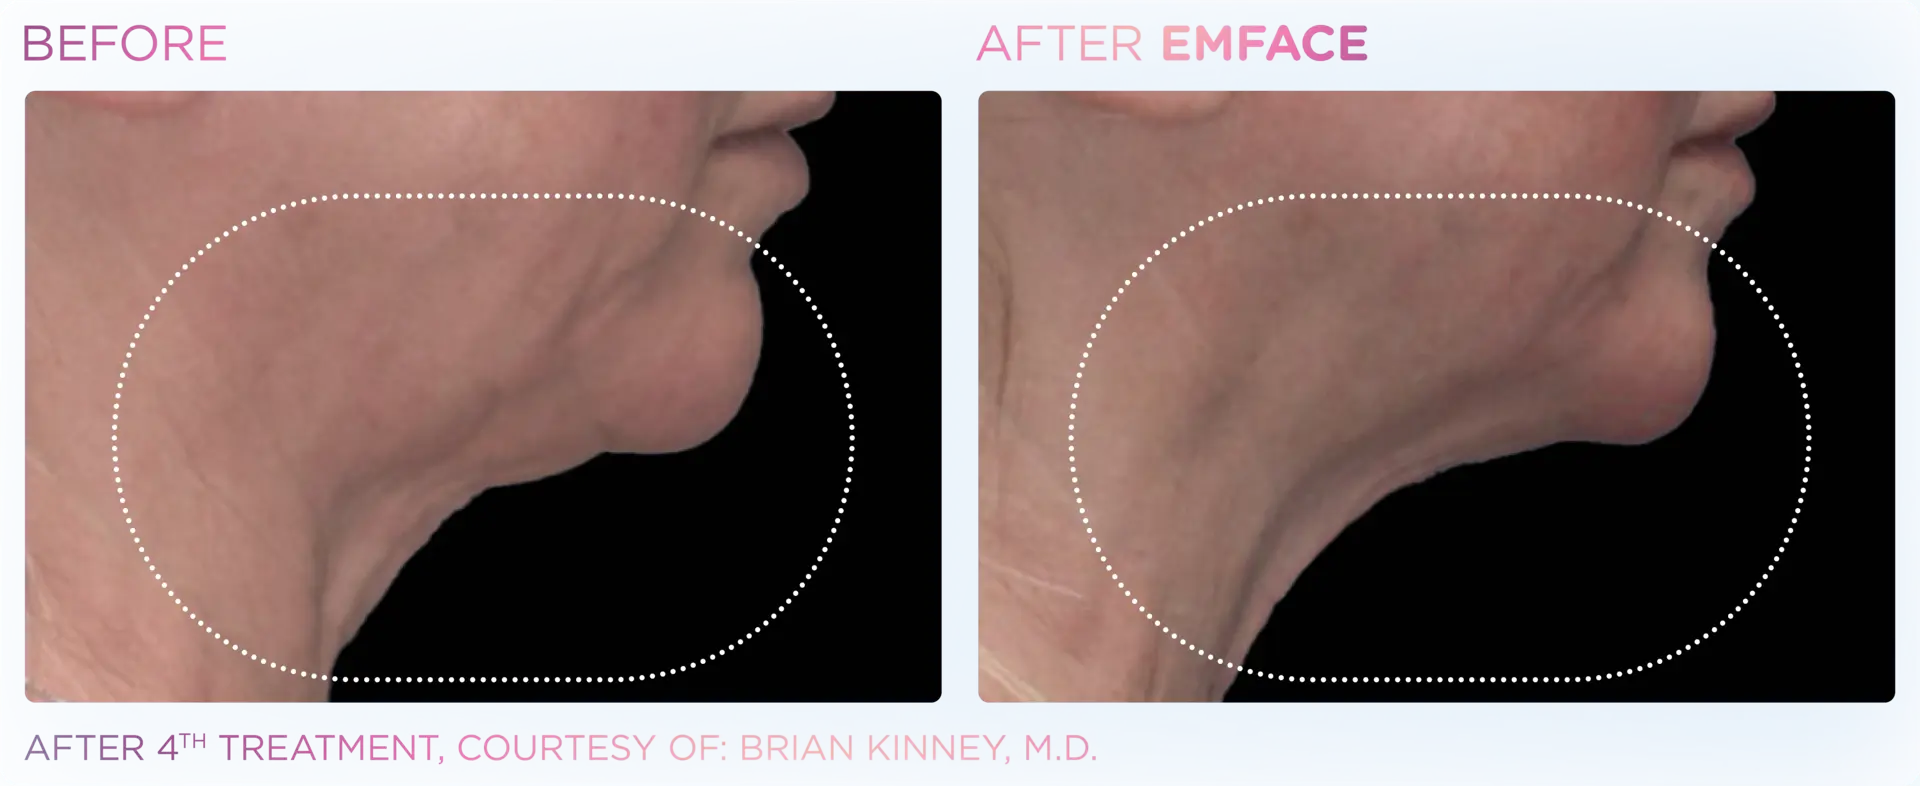 EMFACE Neck and Jaw - Before and After